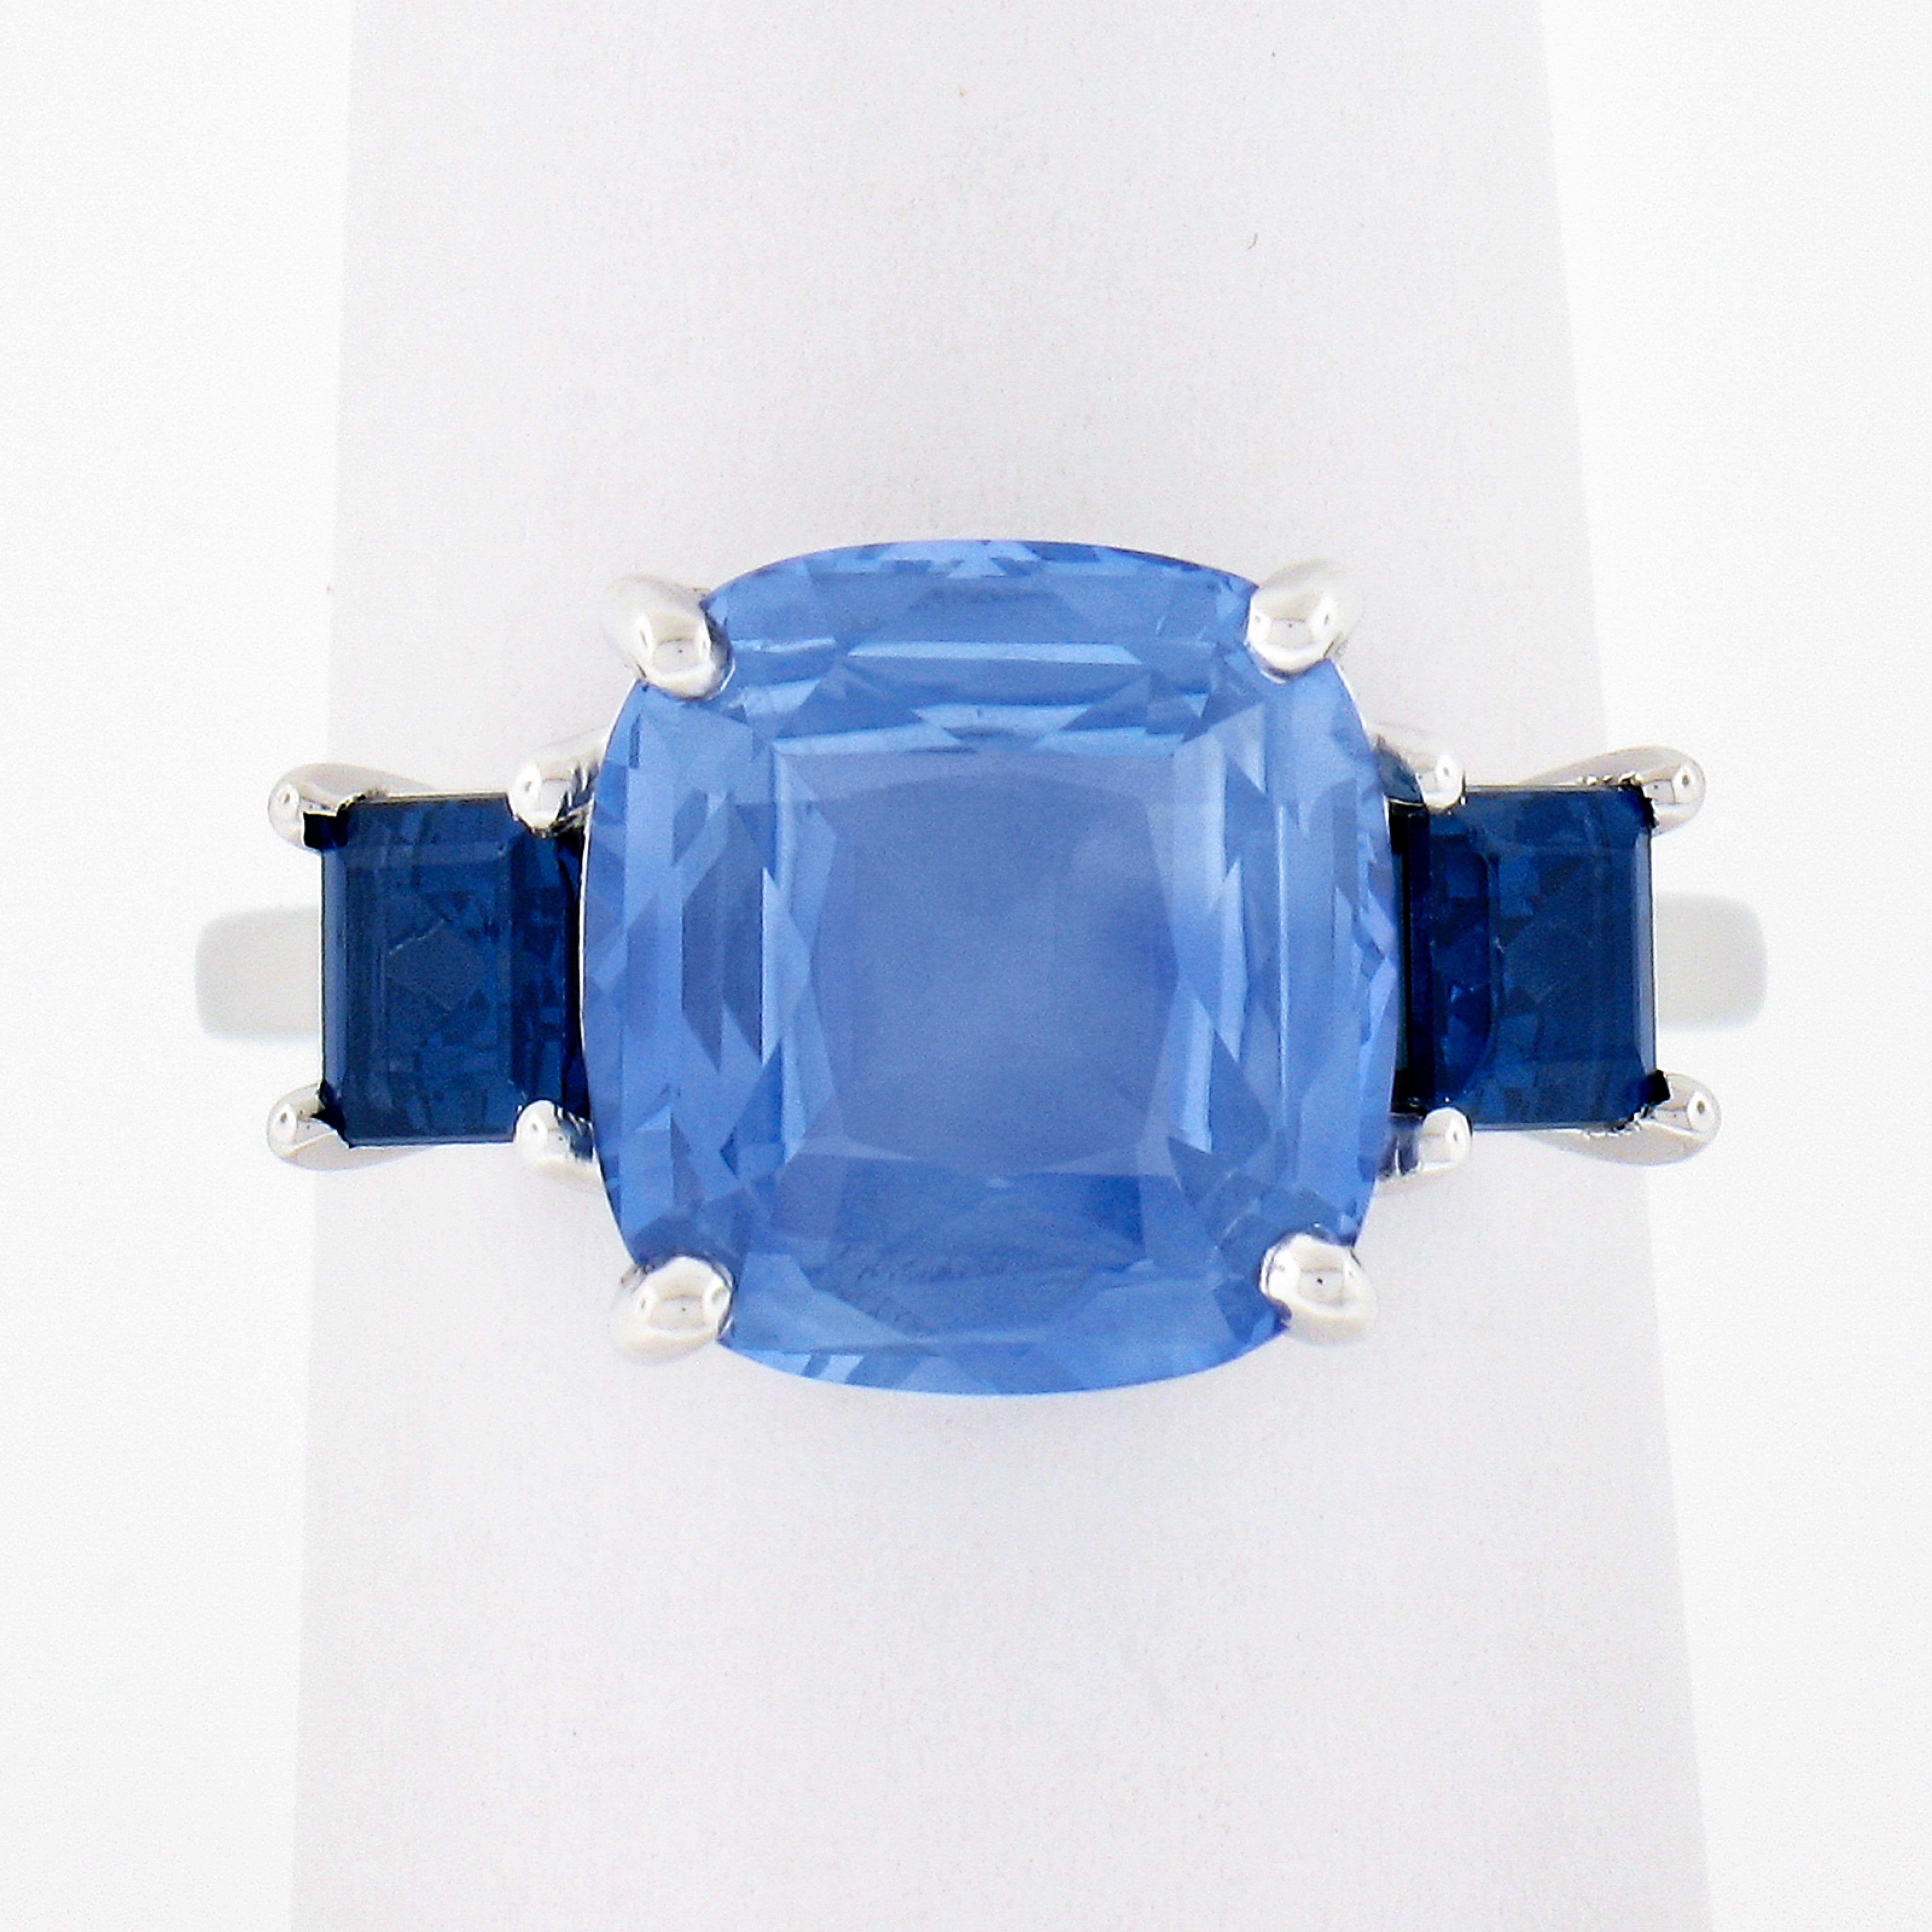 This very elegant sapphire three stone engagement style ring is newly crafted in solid platinum. It features a gorgeous GIA certified, 5.01 carat, cushion cut sapphire neatly prong set at the center showing a beautiful cornflower blue color with